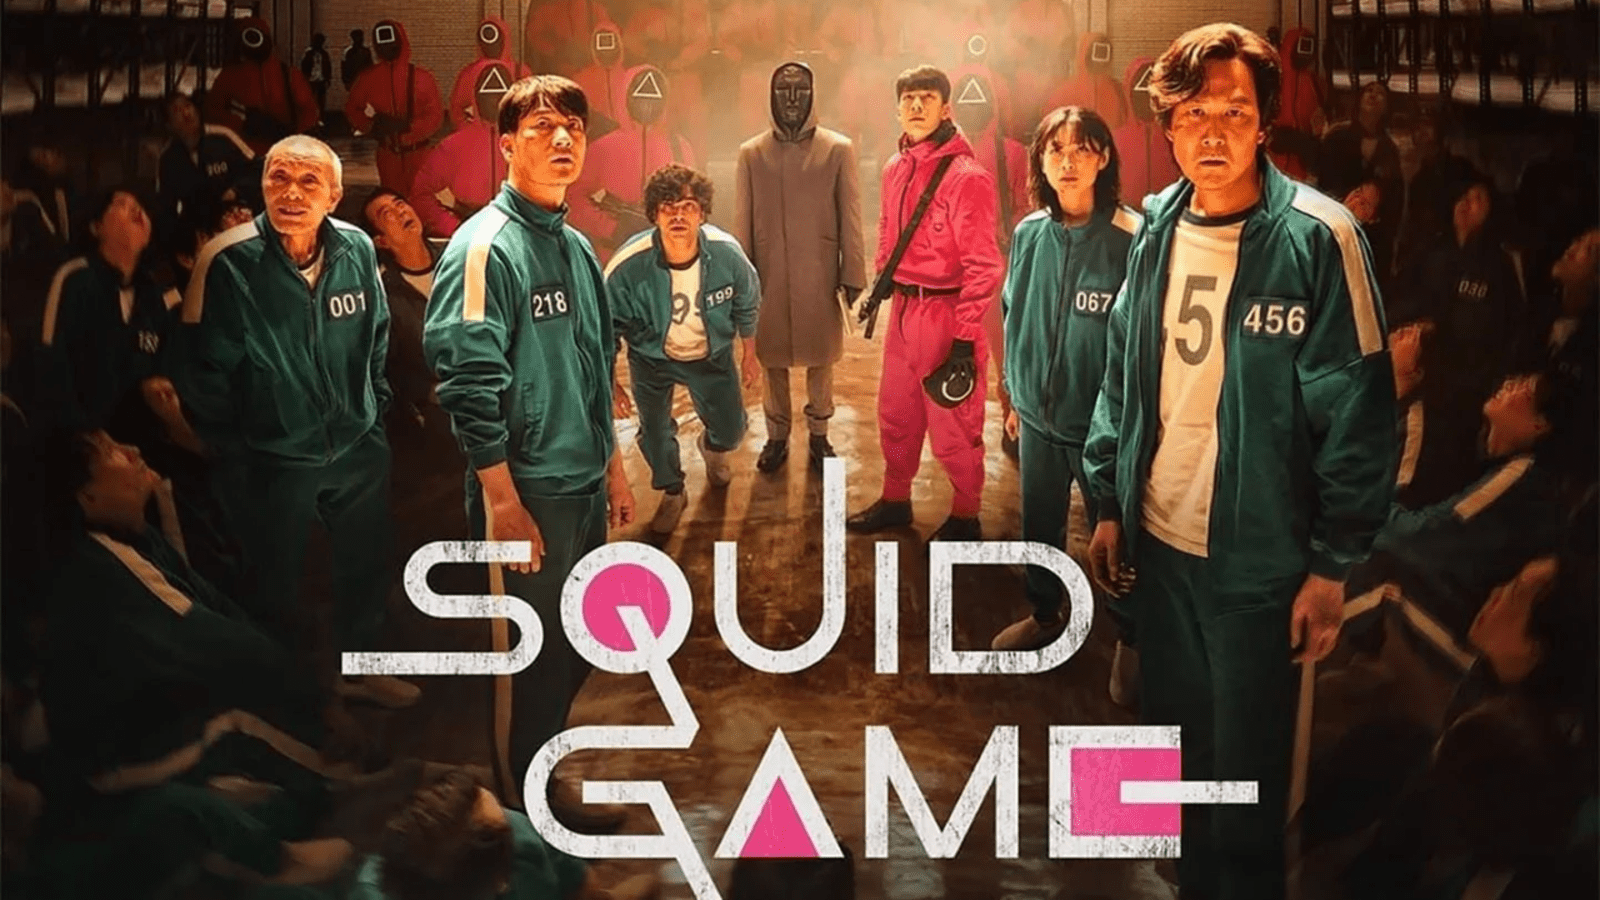 Squid Game Wallpaper HD 4K APK (Android App) - Free Download